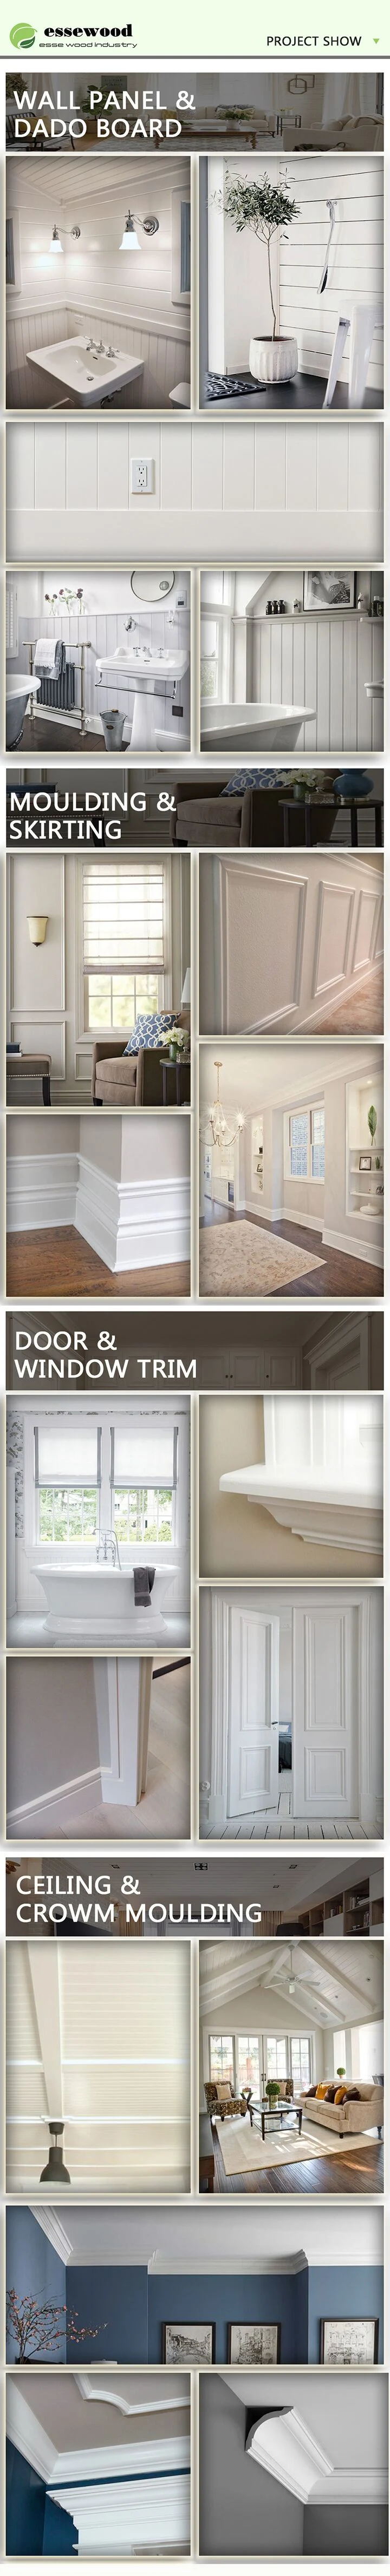 House Exterior Primed Wood Trim Interior and Exterior Decoration by MDF Moulding